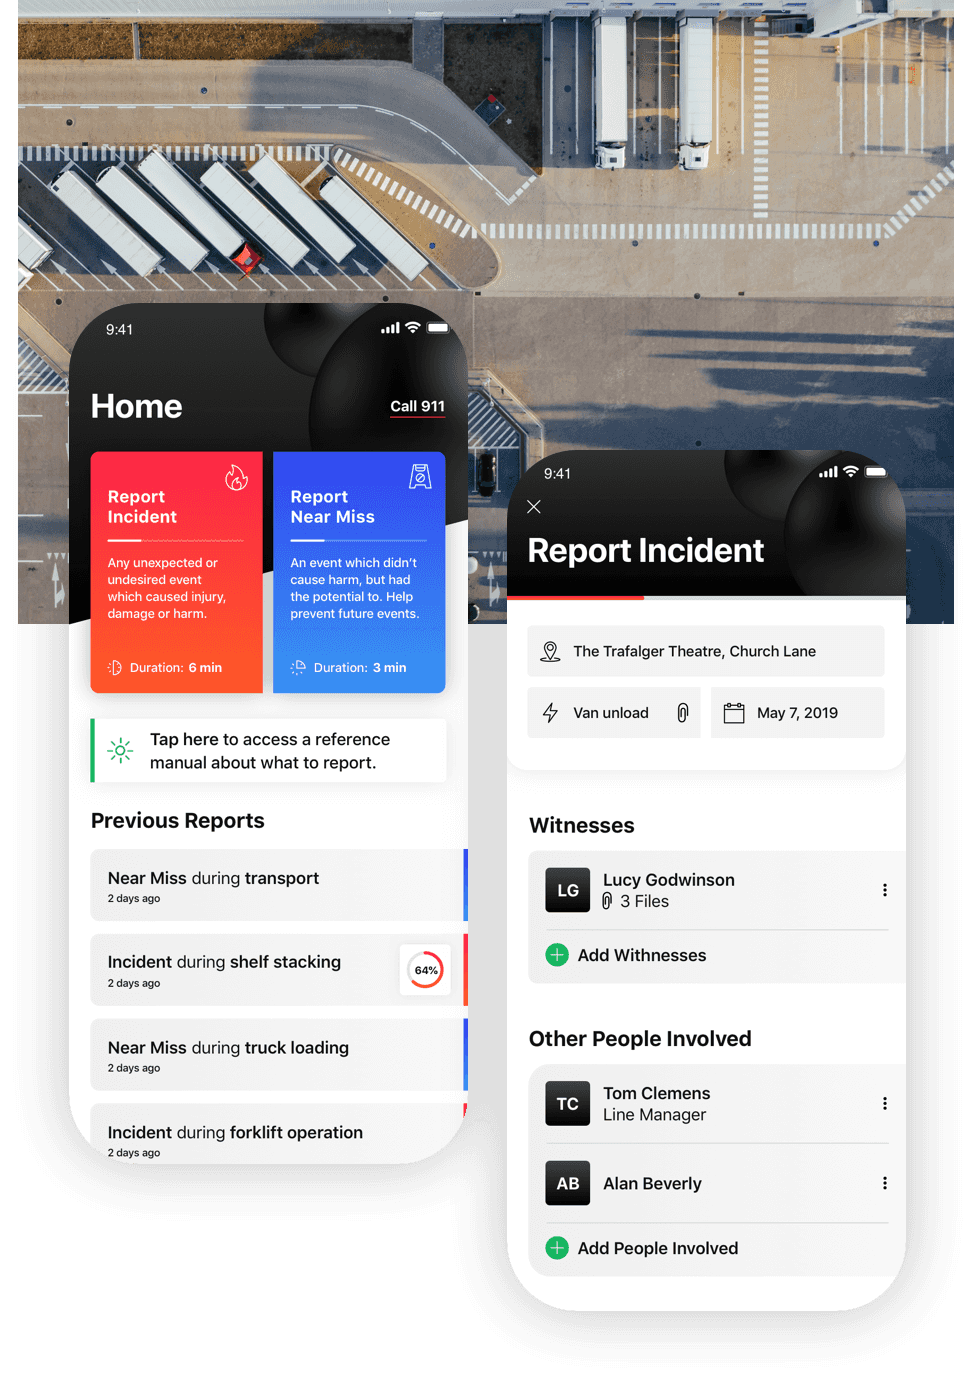 App design on top of an image of a logistics center.